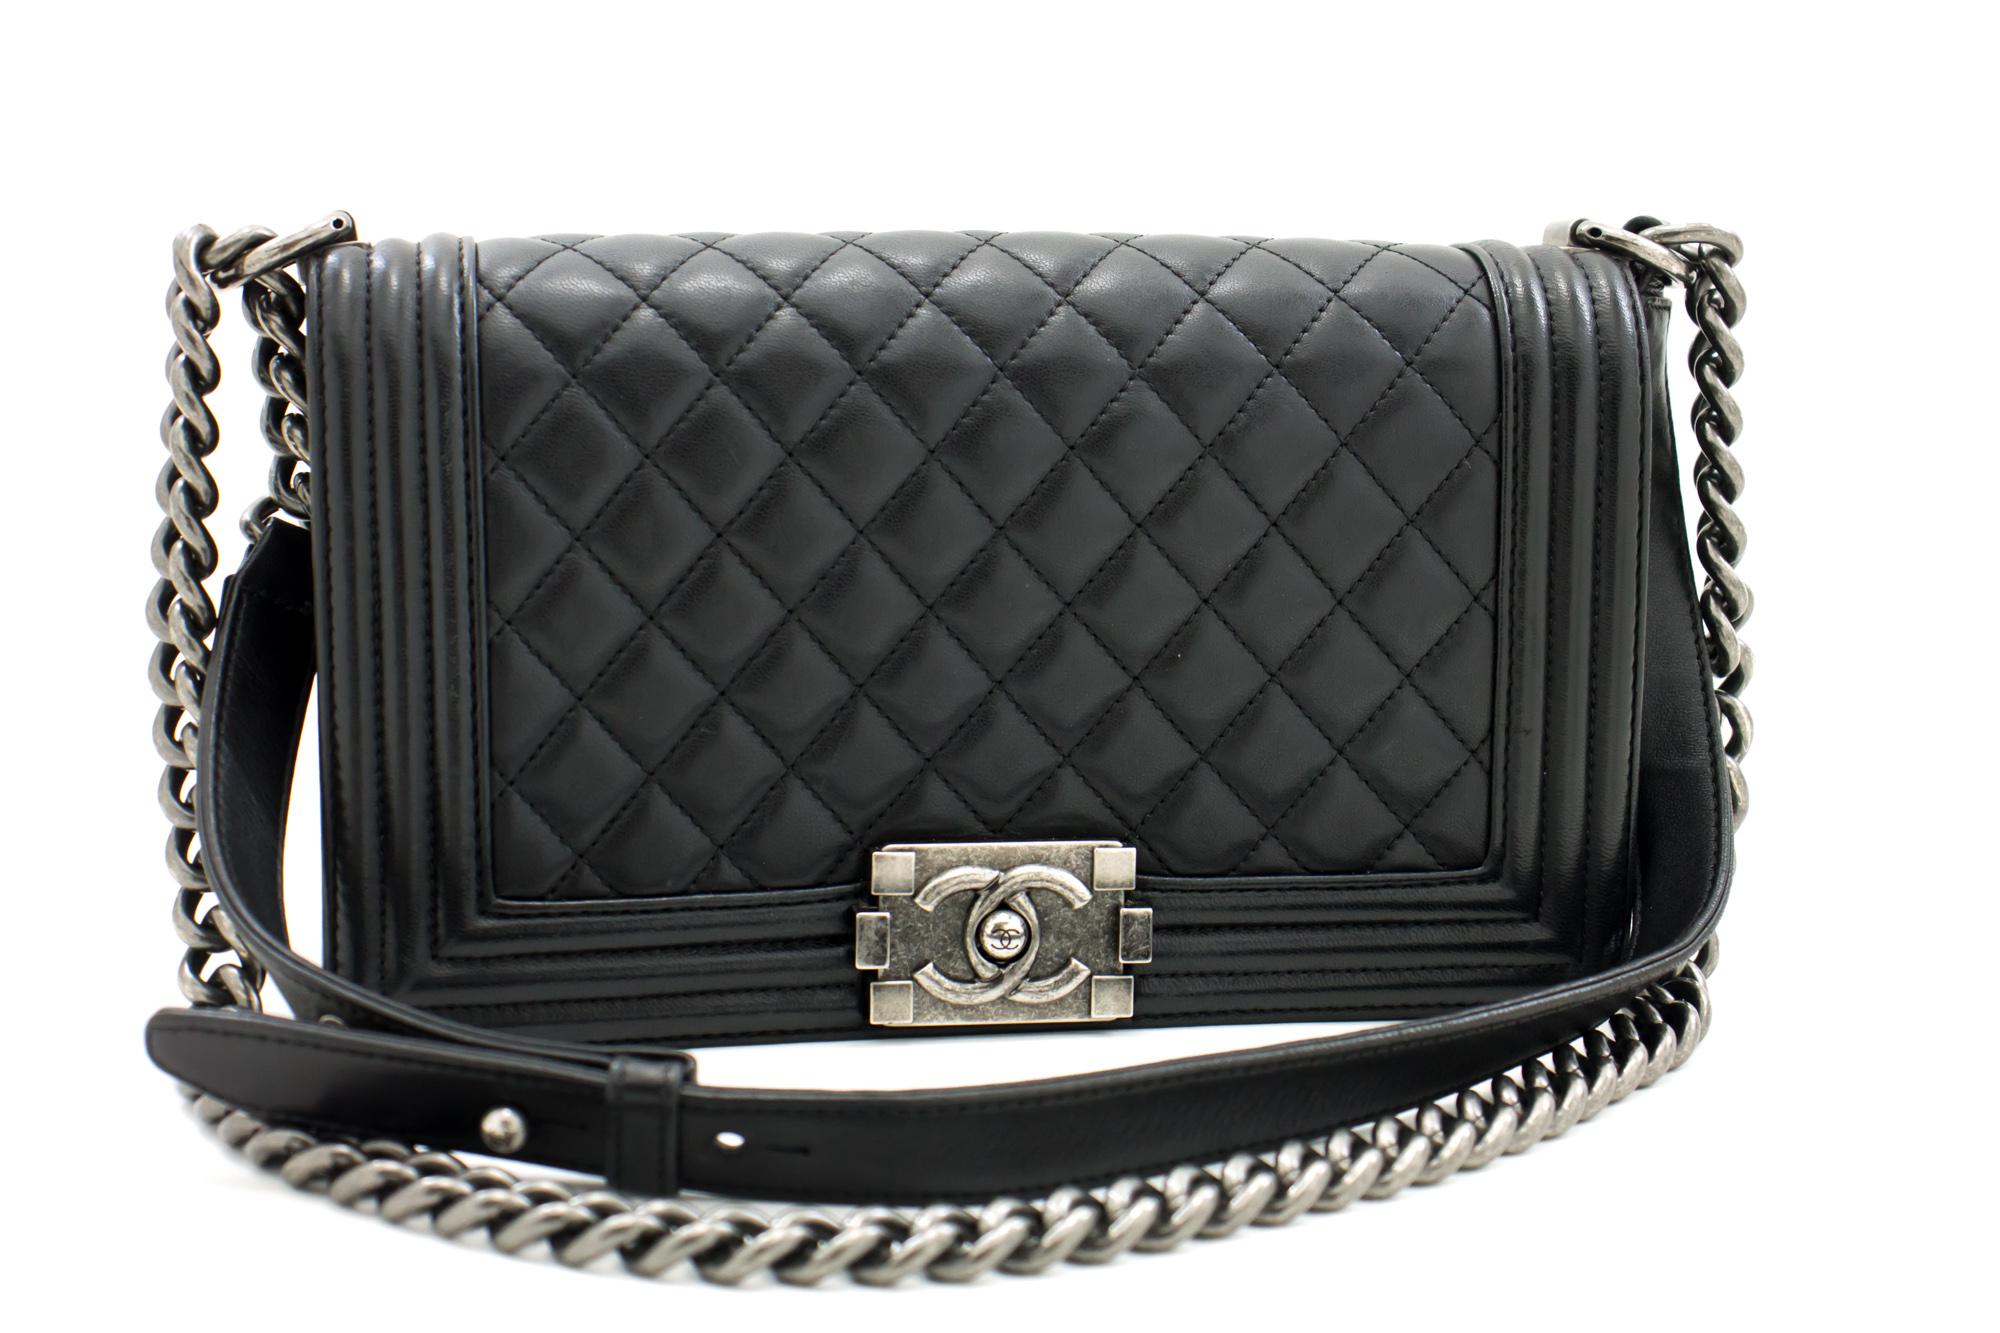 An authentic CHANEL Boy Chain Shoulder Bag Black Quilted Flap Calfskin Leather. The color is Black. The outside material is Leather. The pattern is Solid. This item is Contemporary. The year of manufacture would be 2016.
Conditions & Ratings
Outside